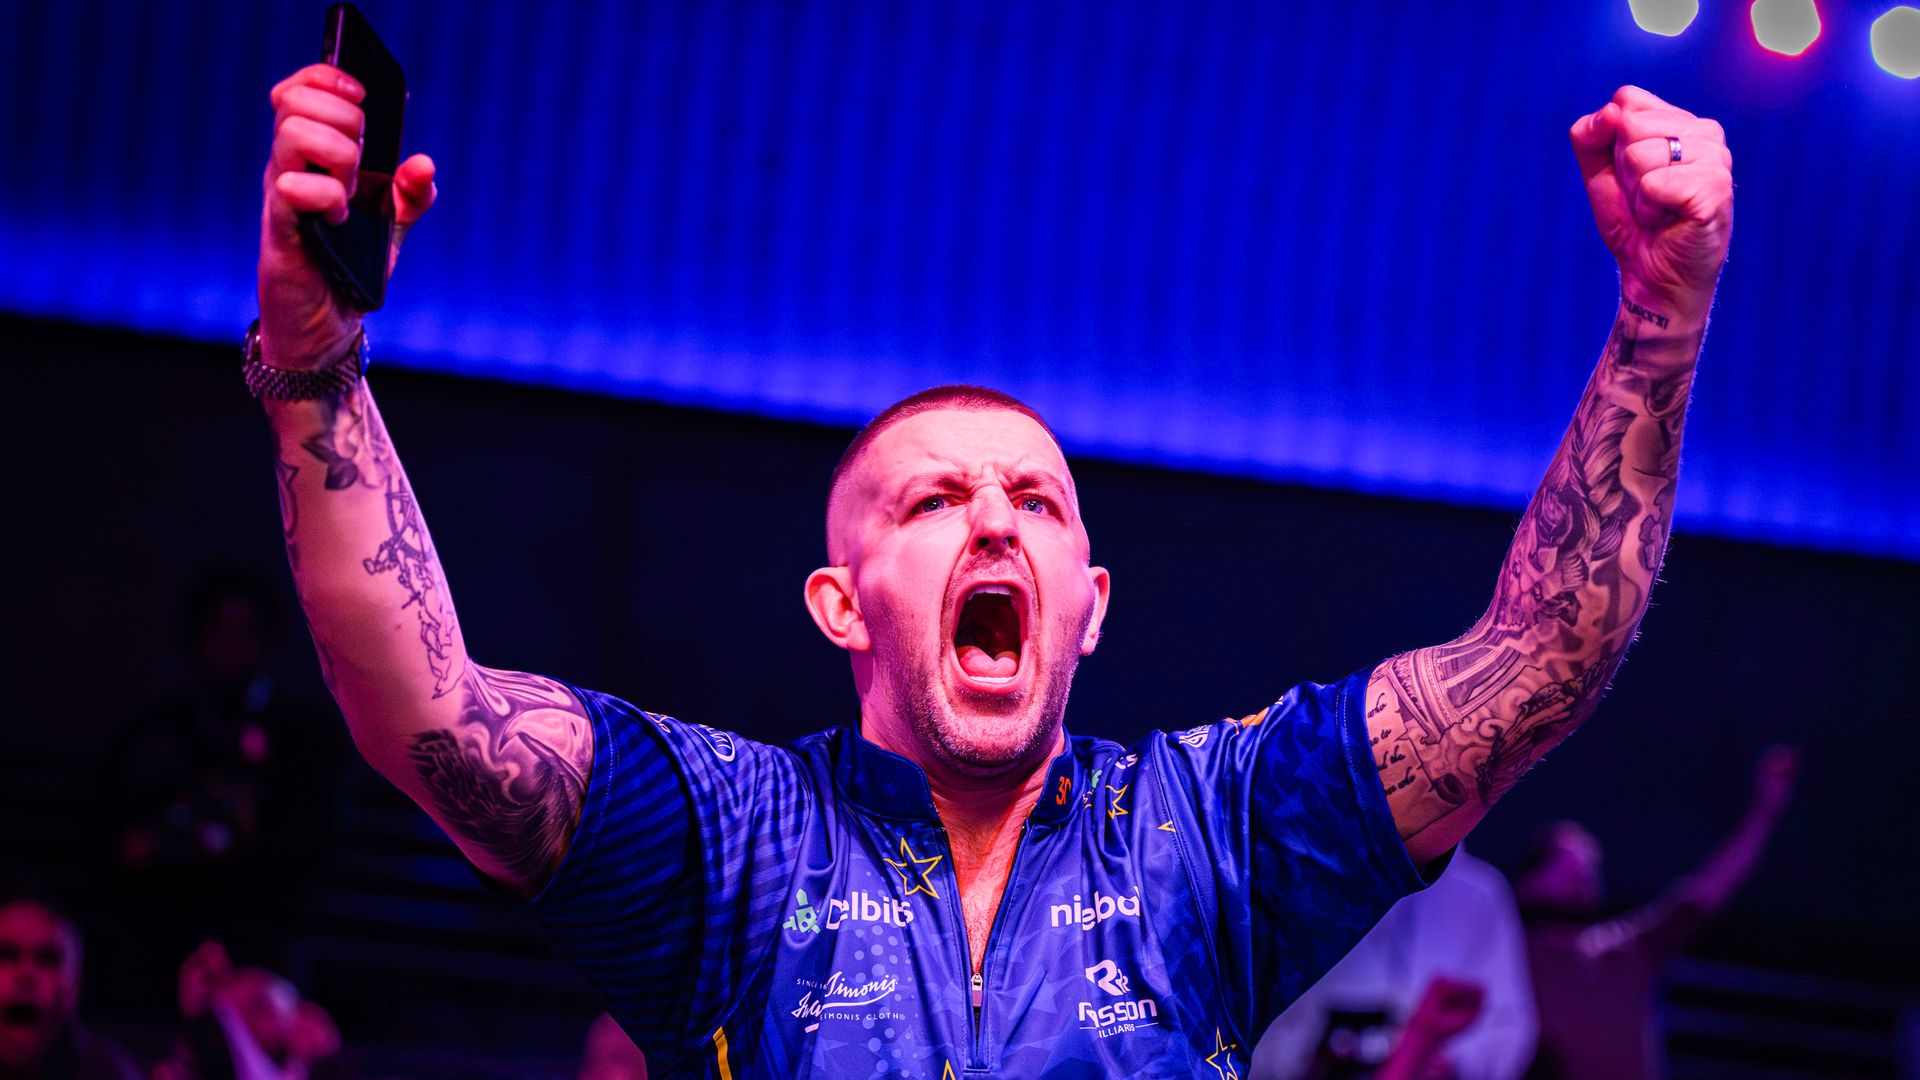 Europe two points away from convincing Mosconi Cup win